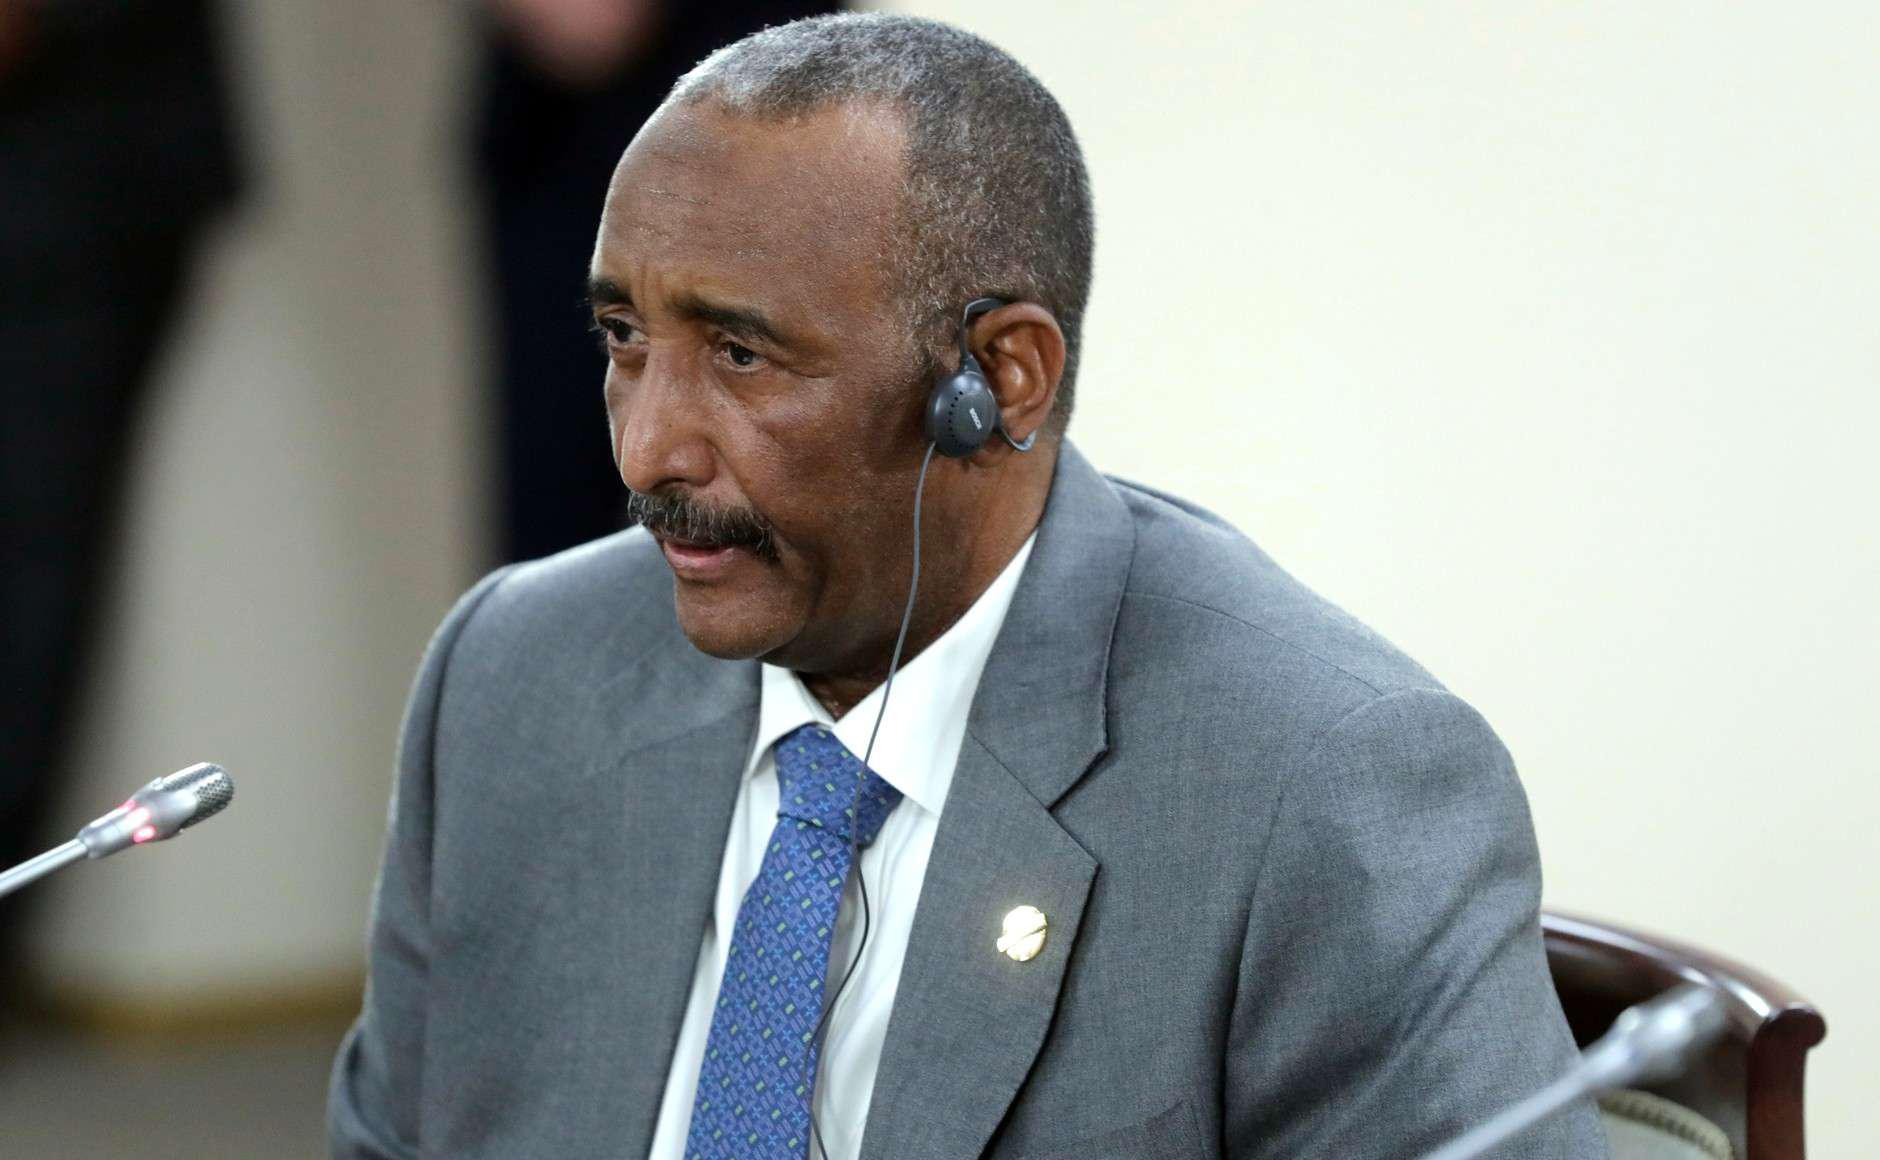 Sudan's cabinet said it had been unaware of such talks and convened Tuesday to discuss the issue.